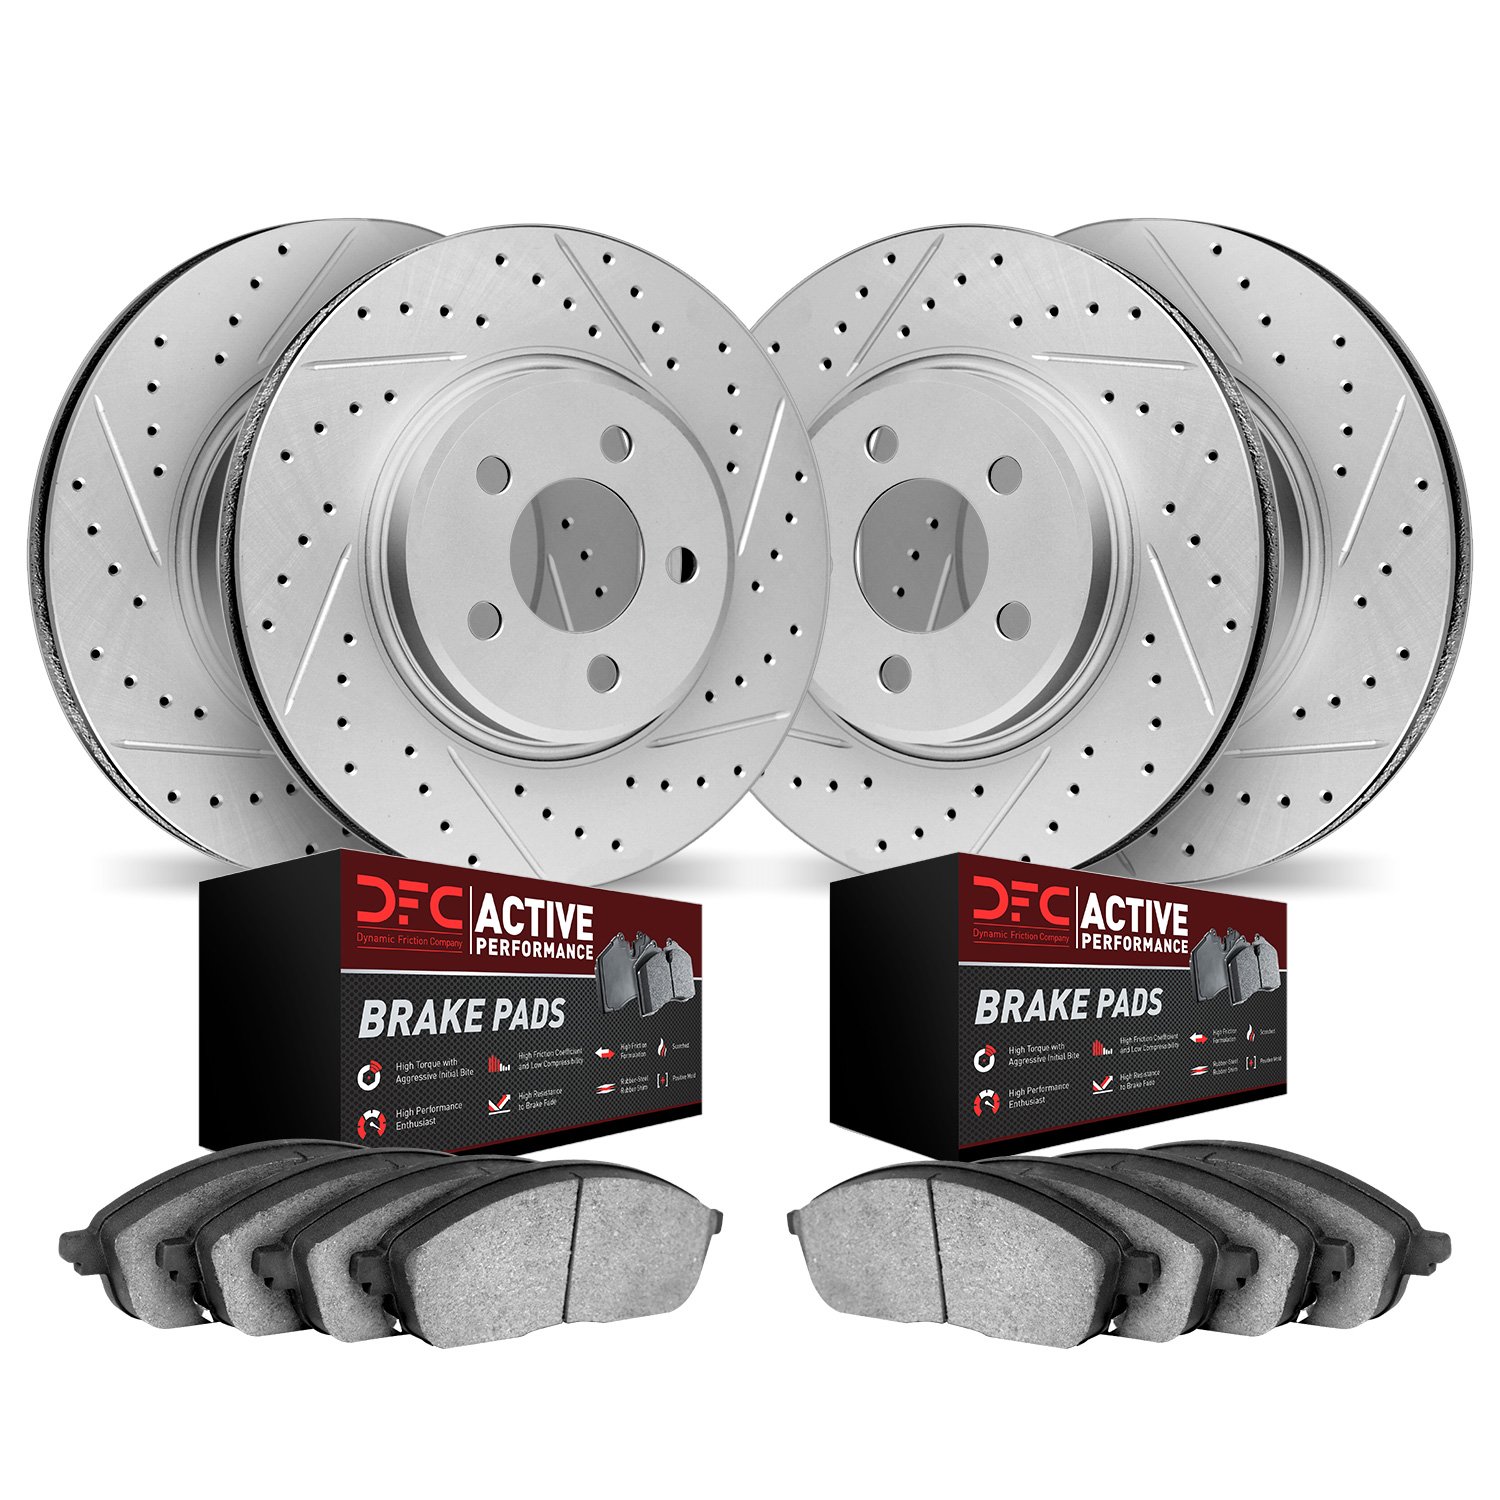 2704-54020 Geoperformance Drilled/Slotted Brake Rotors with Active Performance Pads Kit, 2011-2014 Ford/Lincoln/Mercury/Mazda, P